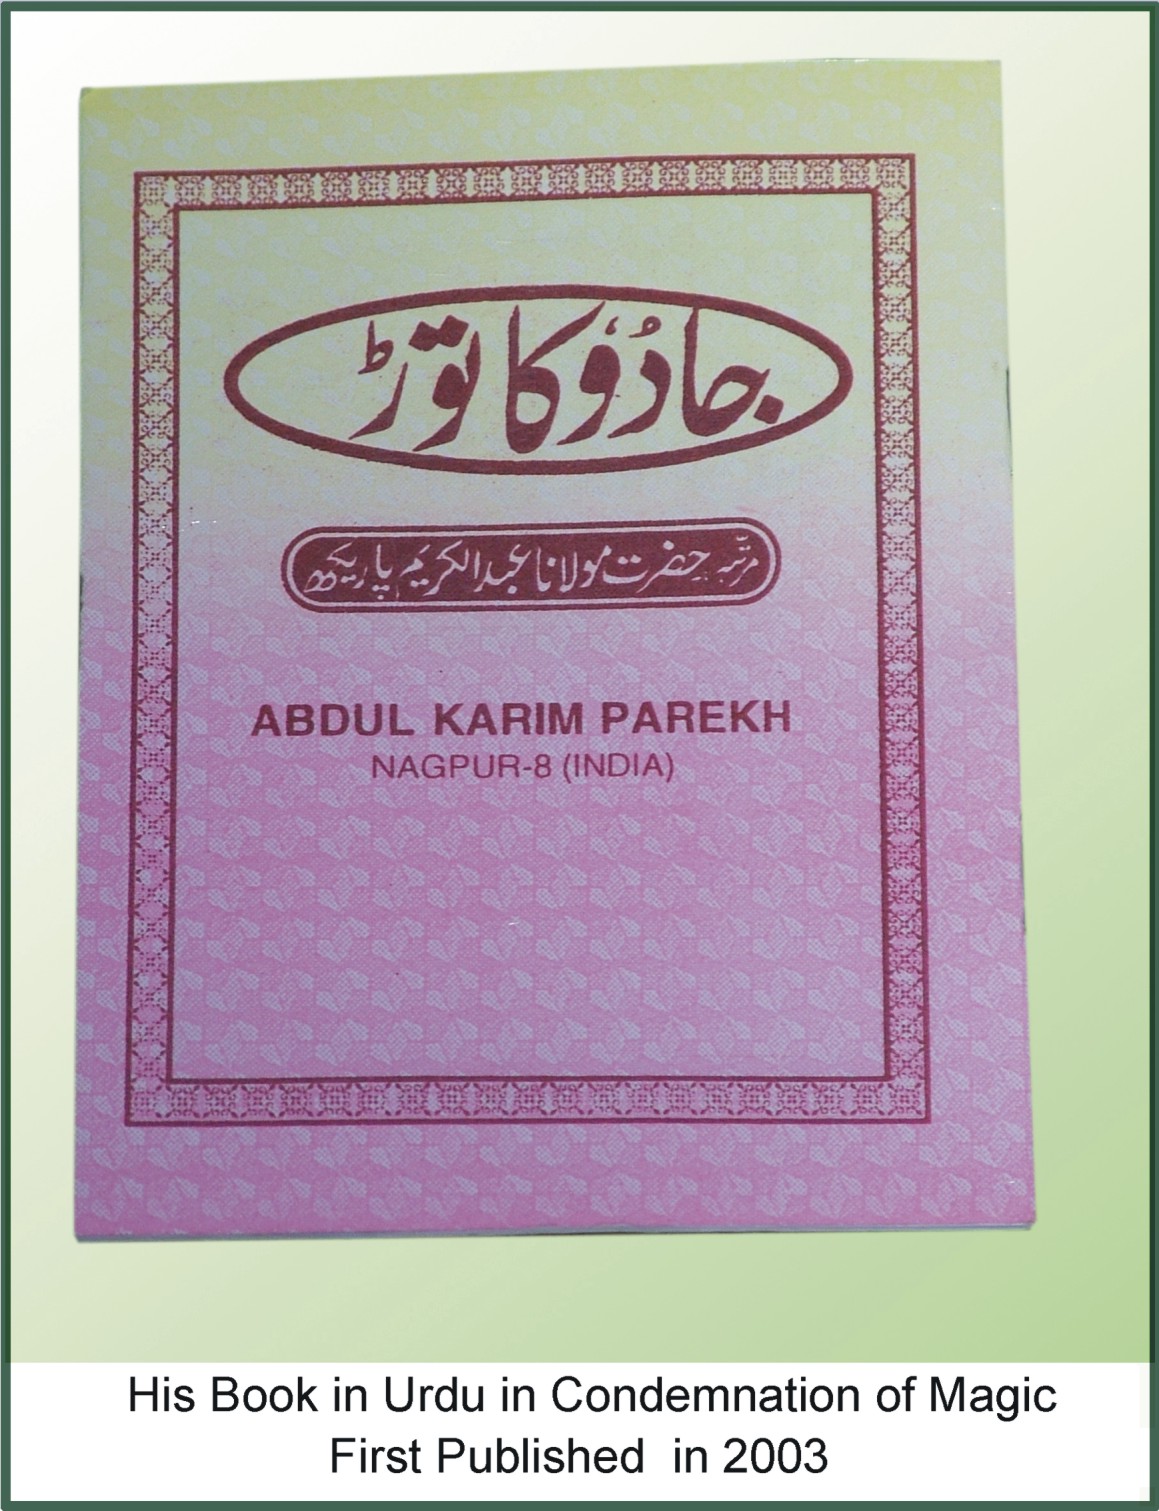 Condemnation of Magic (Urdu) First Published in 2003